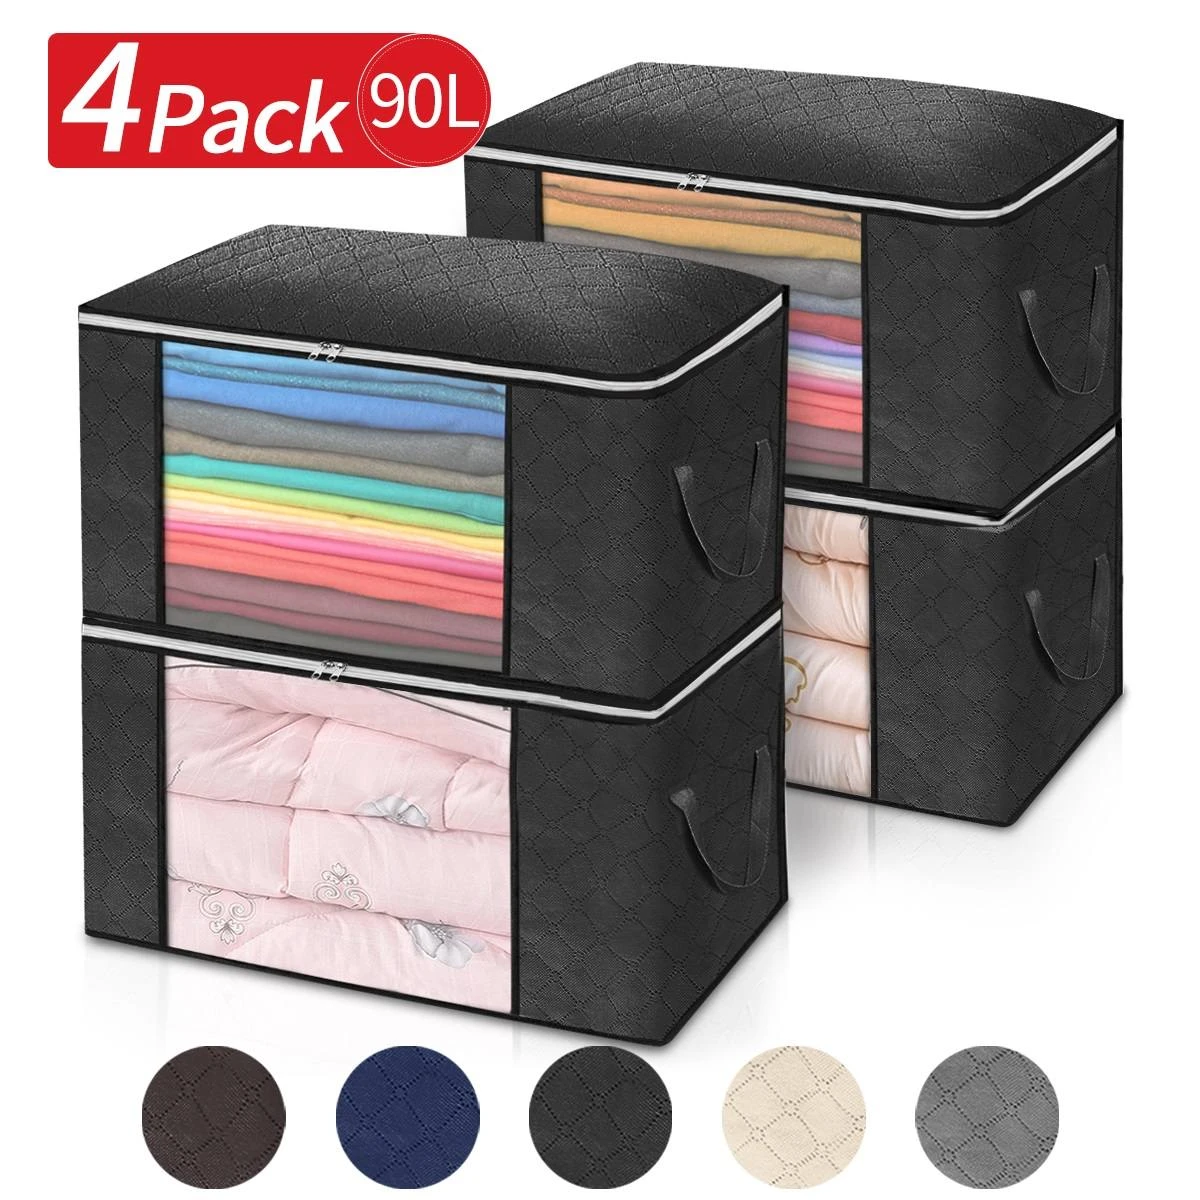 90L 4pcs/set Large Capacity Clothes Storage Bag Home Organizer Foldable with Reinforced Handle for Comforters Blankets Bedding